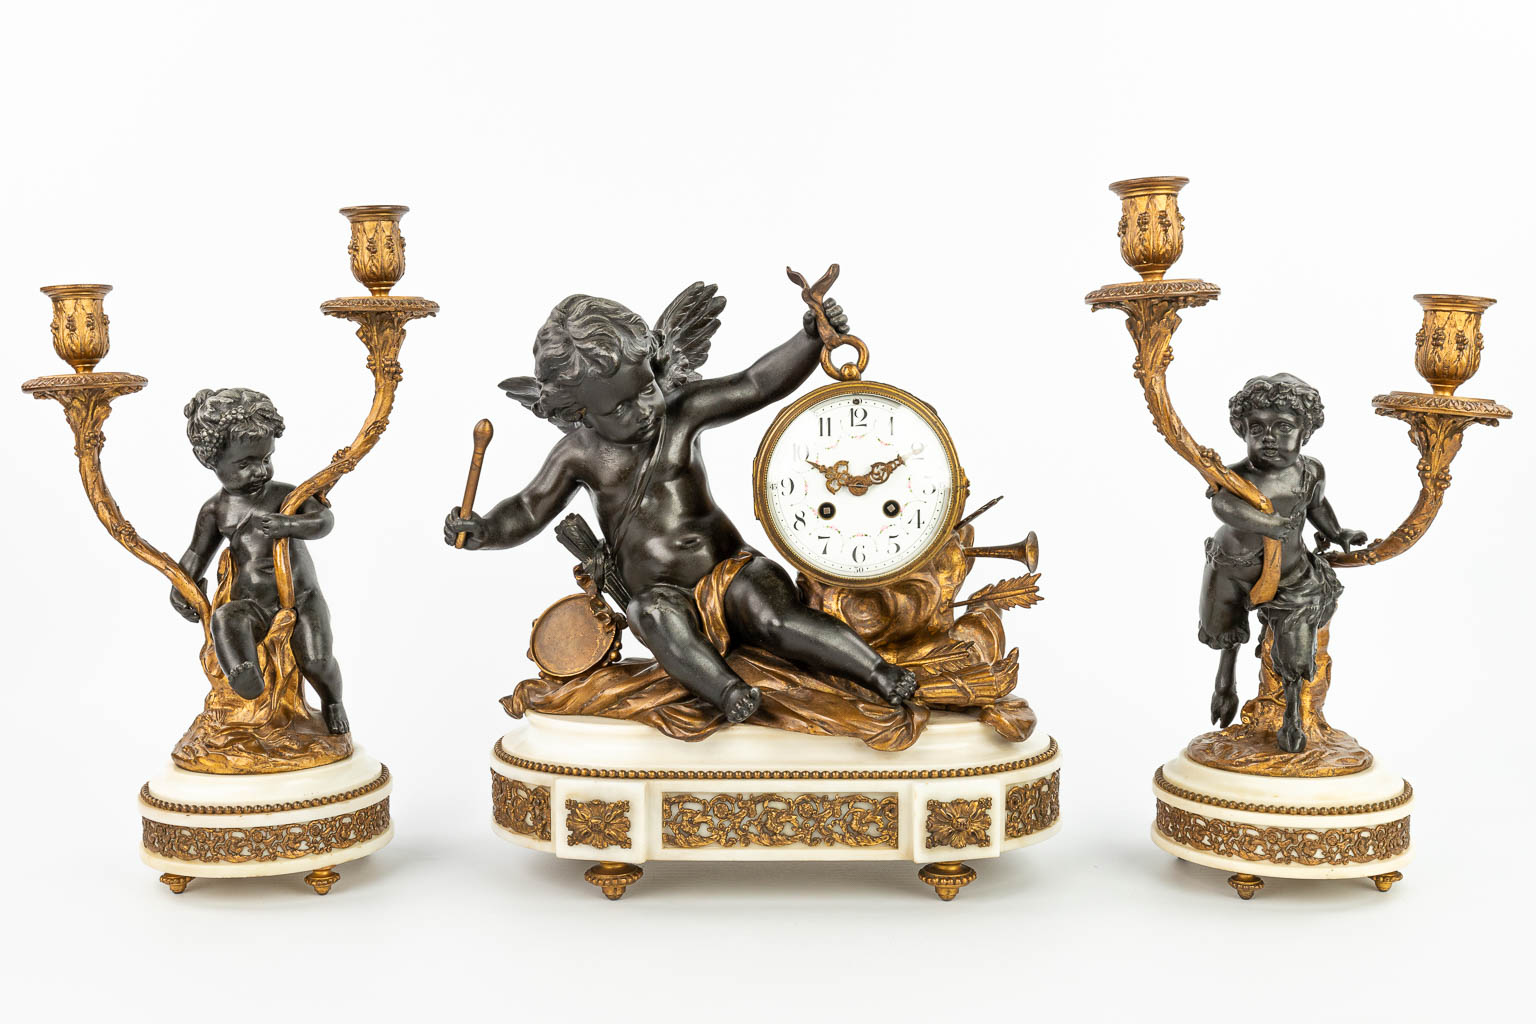 A three-piece mantle clock decorated with putti and a satyr, made of patinated and gilt spelter. (H:37cm)